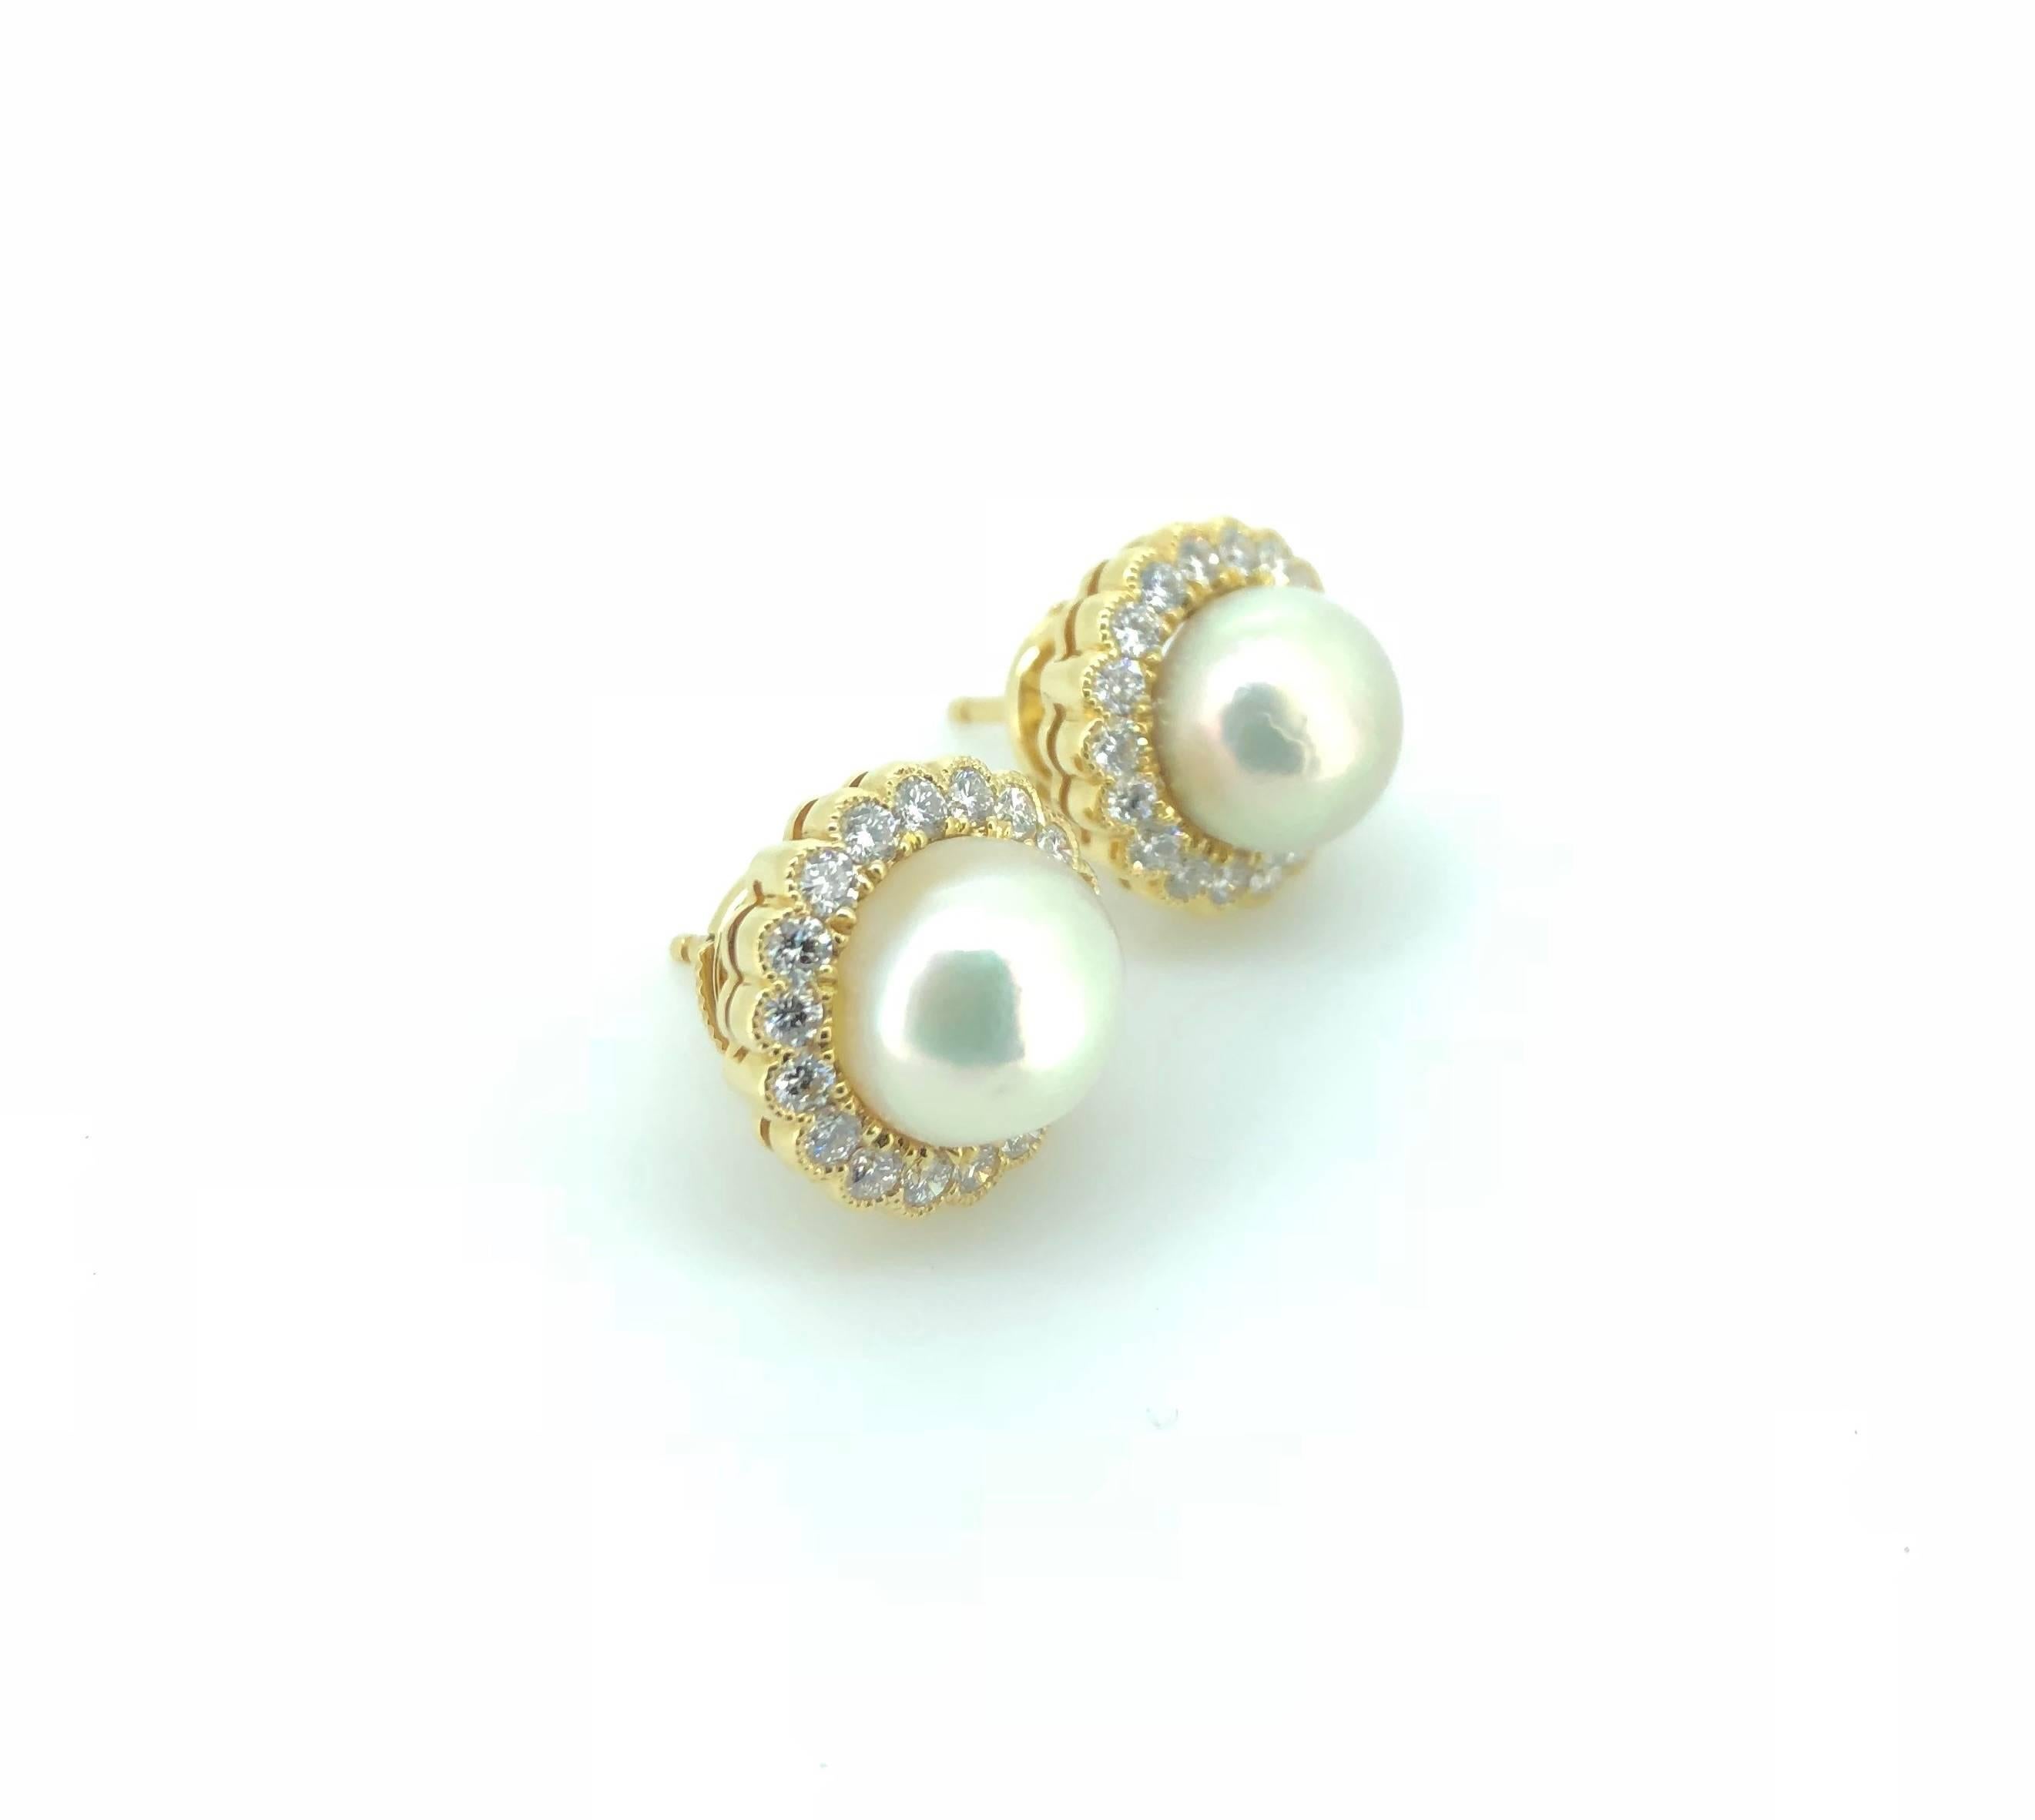 A Pair of classic and timeless Natural Saltwater Pearl Button Diamond Earrings. 
Mounted in 18K Yellow Gold and surrounded by cluster of round brilliant cut diamonds in milgrain pave setting.  The pair of Pearl buttons measure between 8.3 - 9.0mm